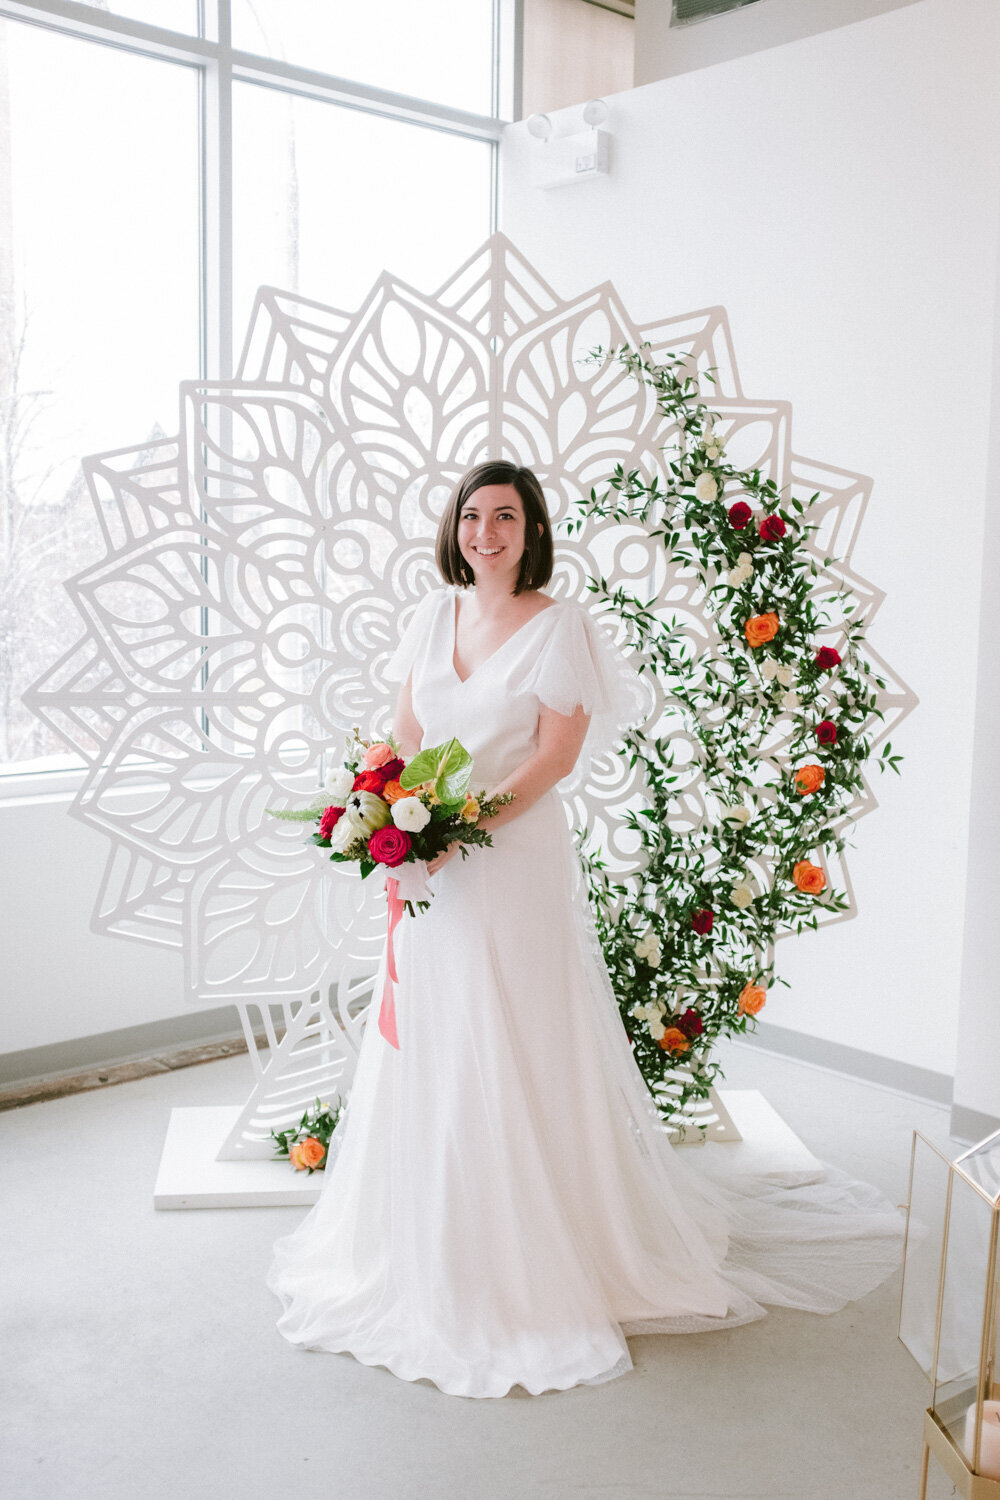 Pretty bride holding her flower bouquet in front of an elegant floral wedding backdrop